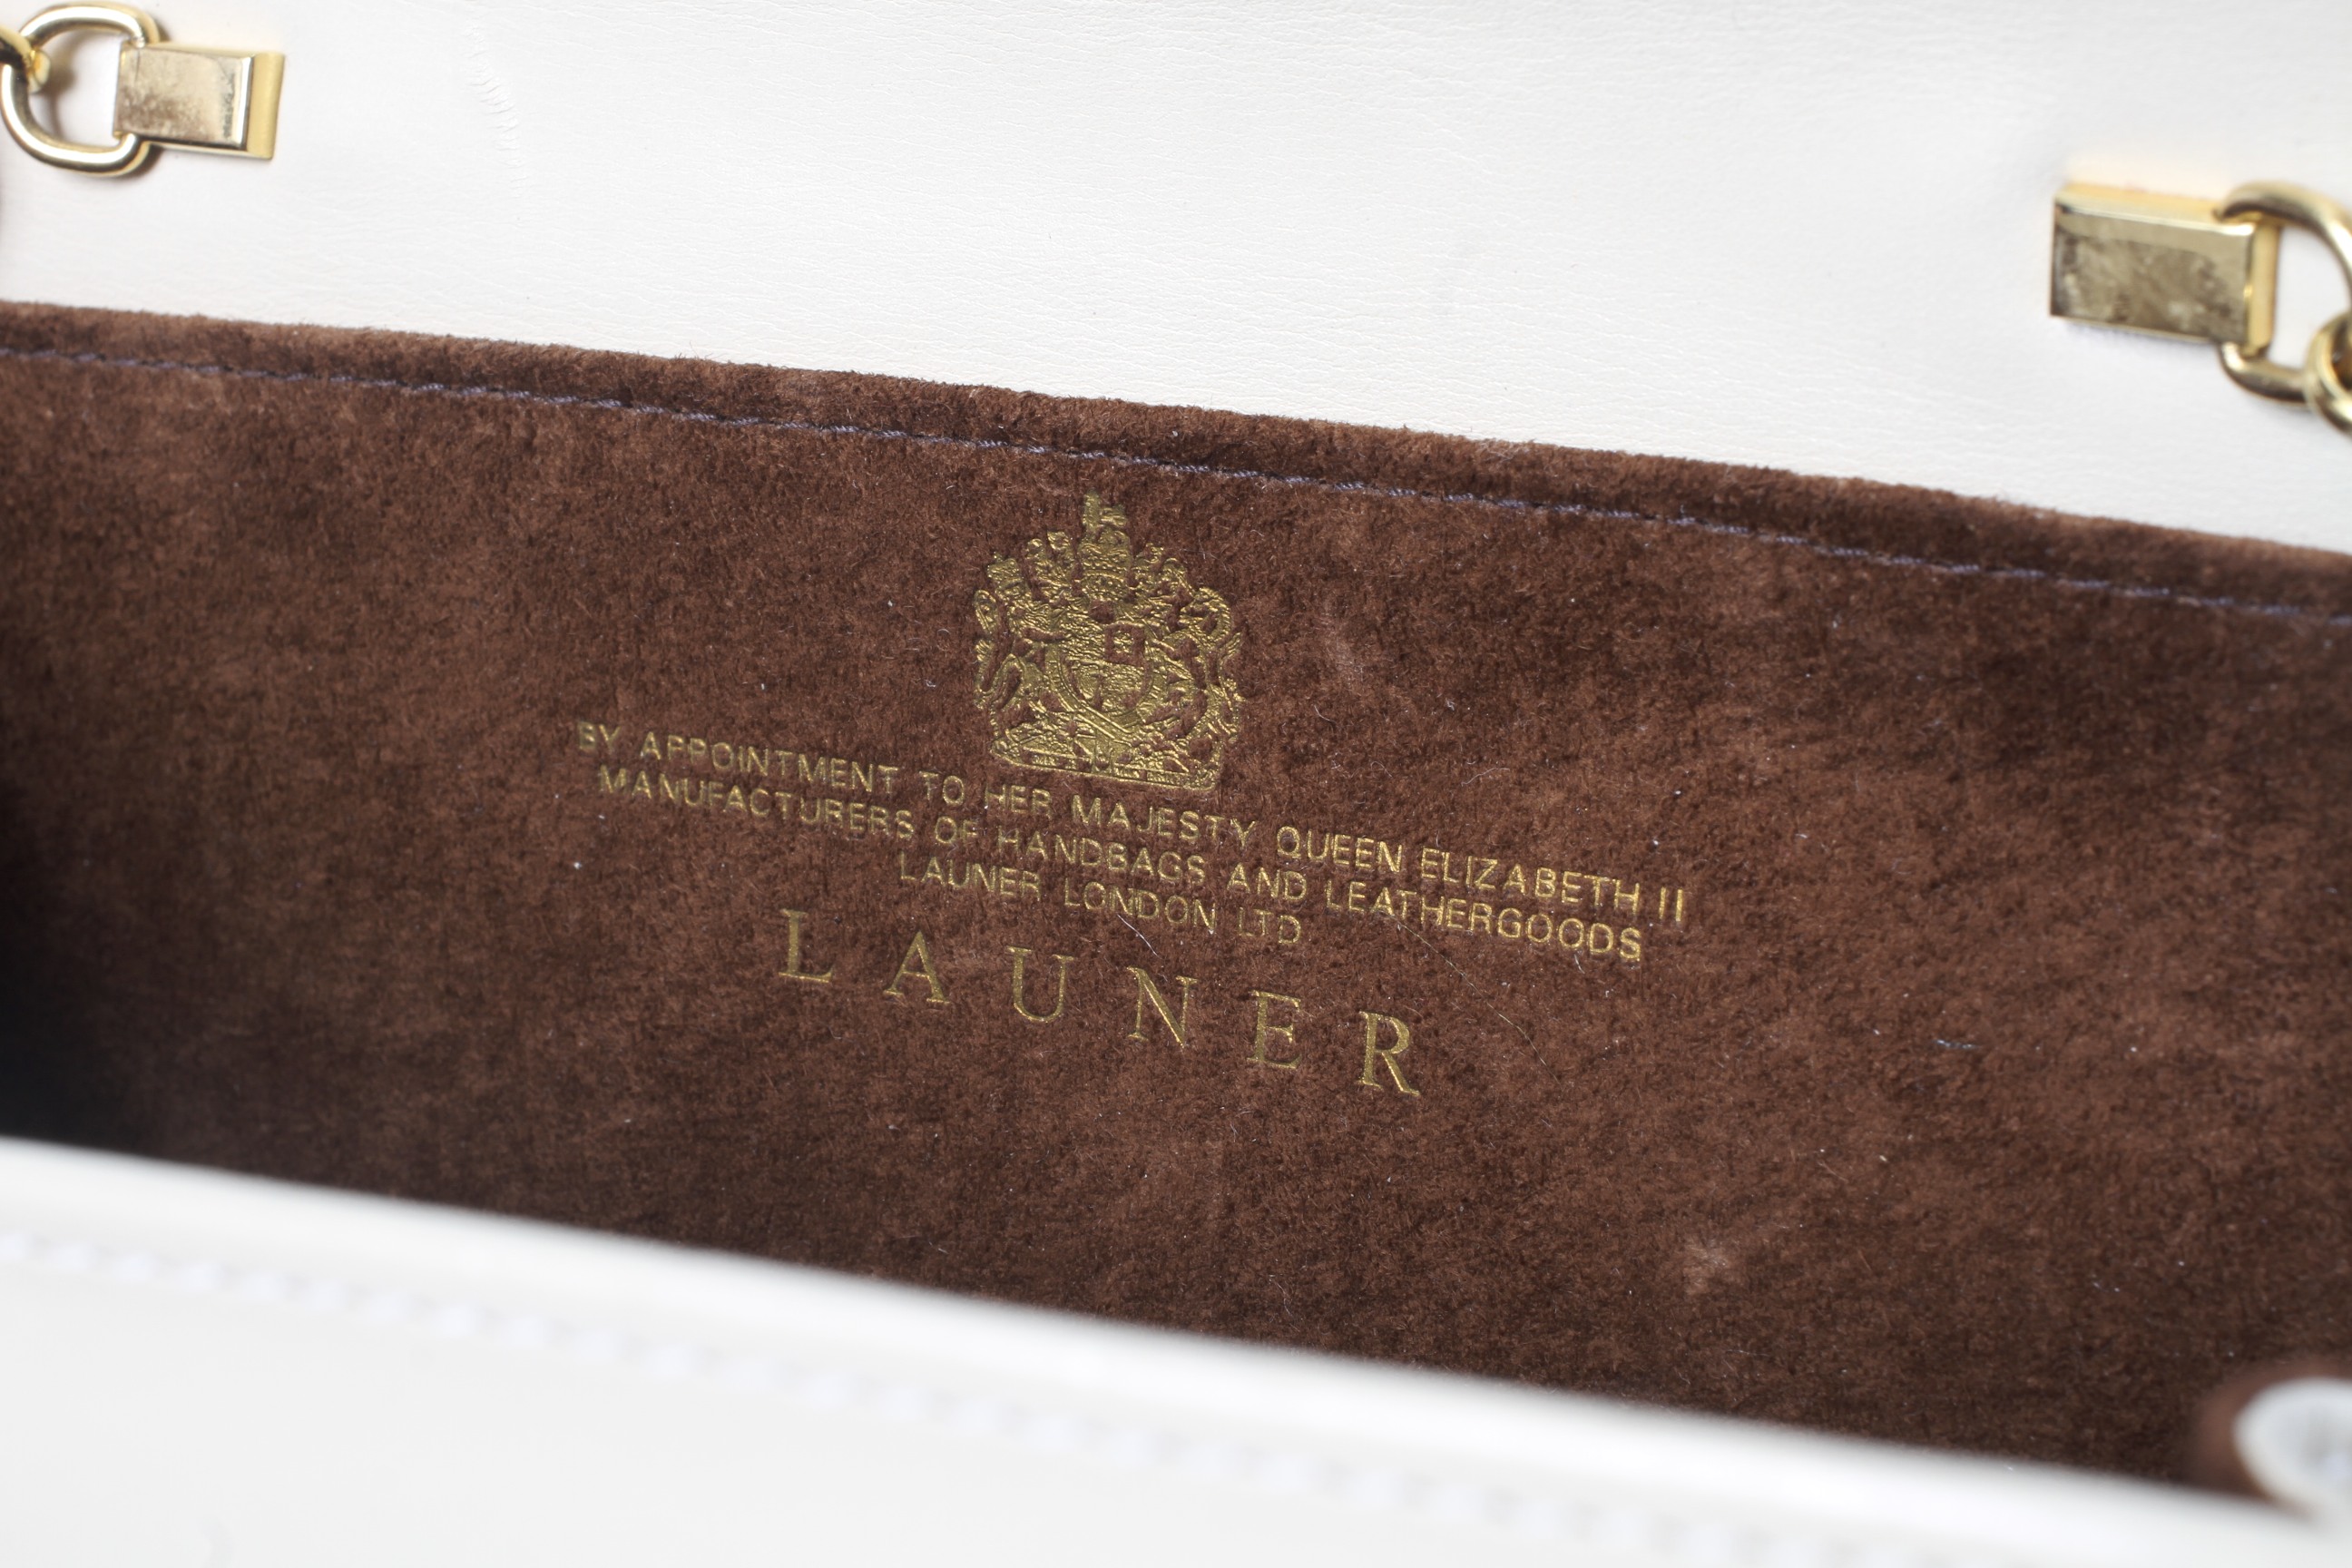 A Launer of London cream leather clutch bag. - Image 2 of 2